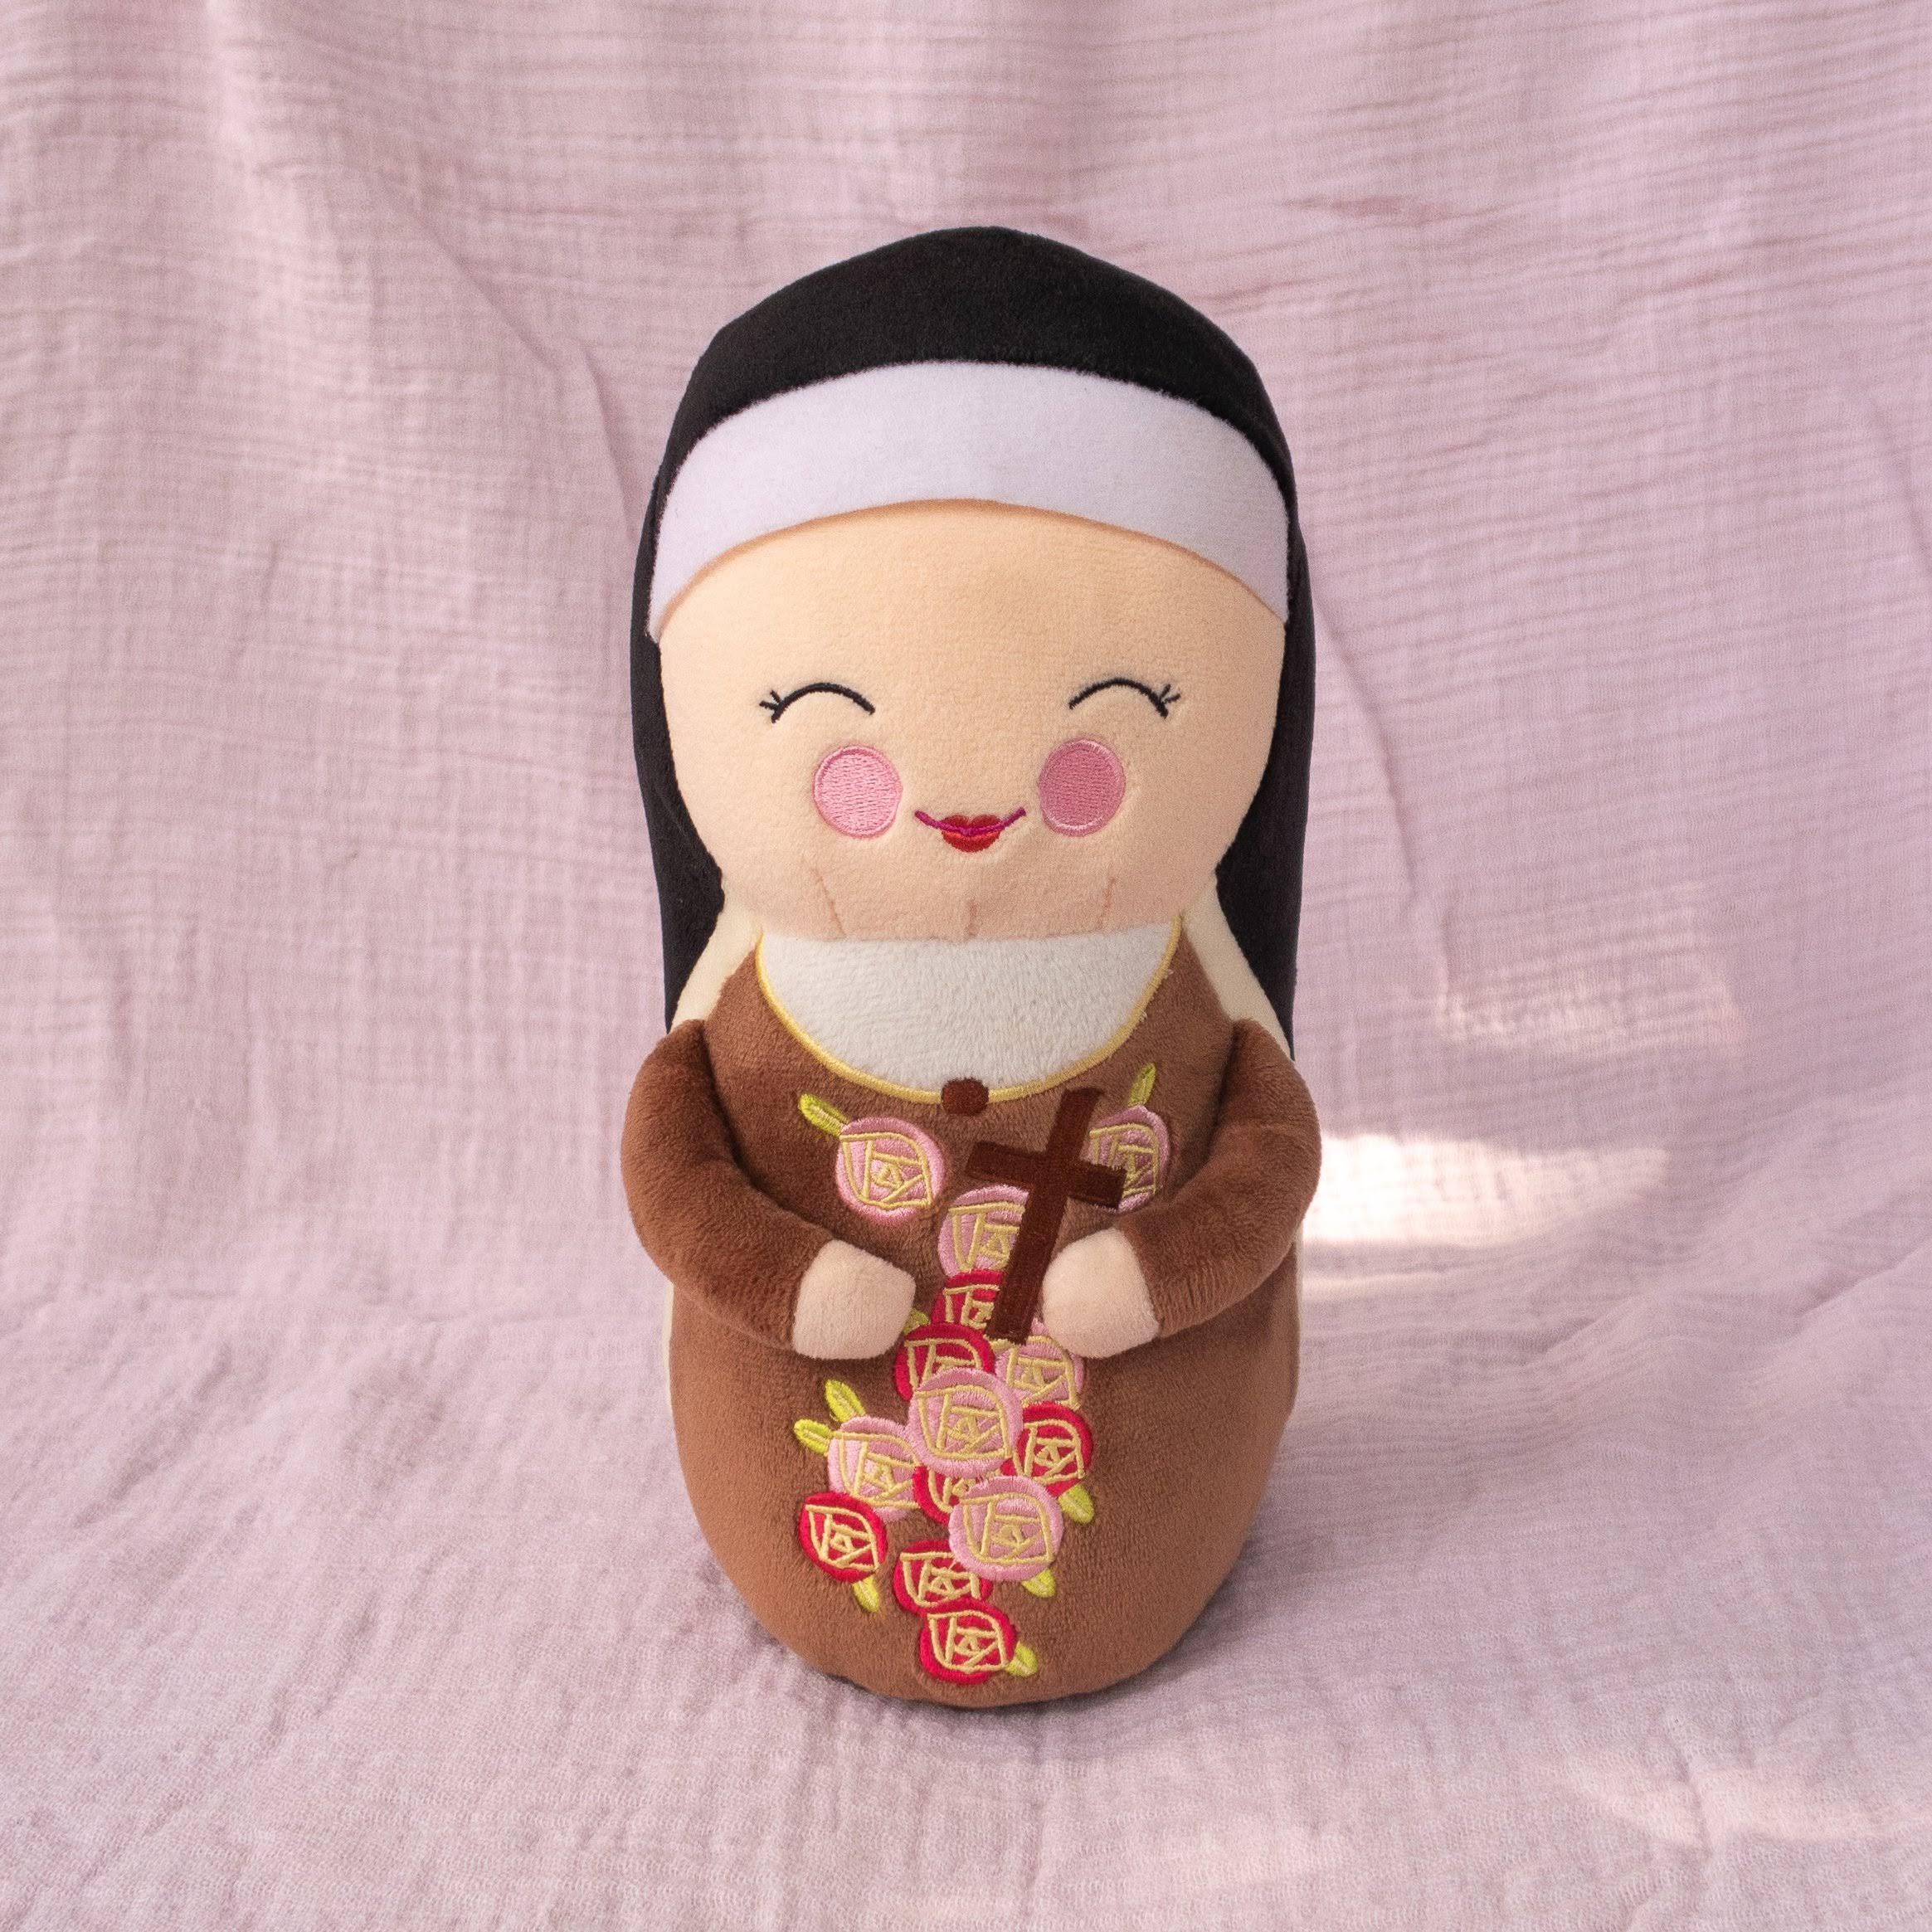 Plush St. Therese of Lisieux Shining Light Doll